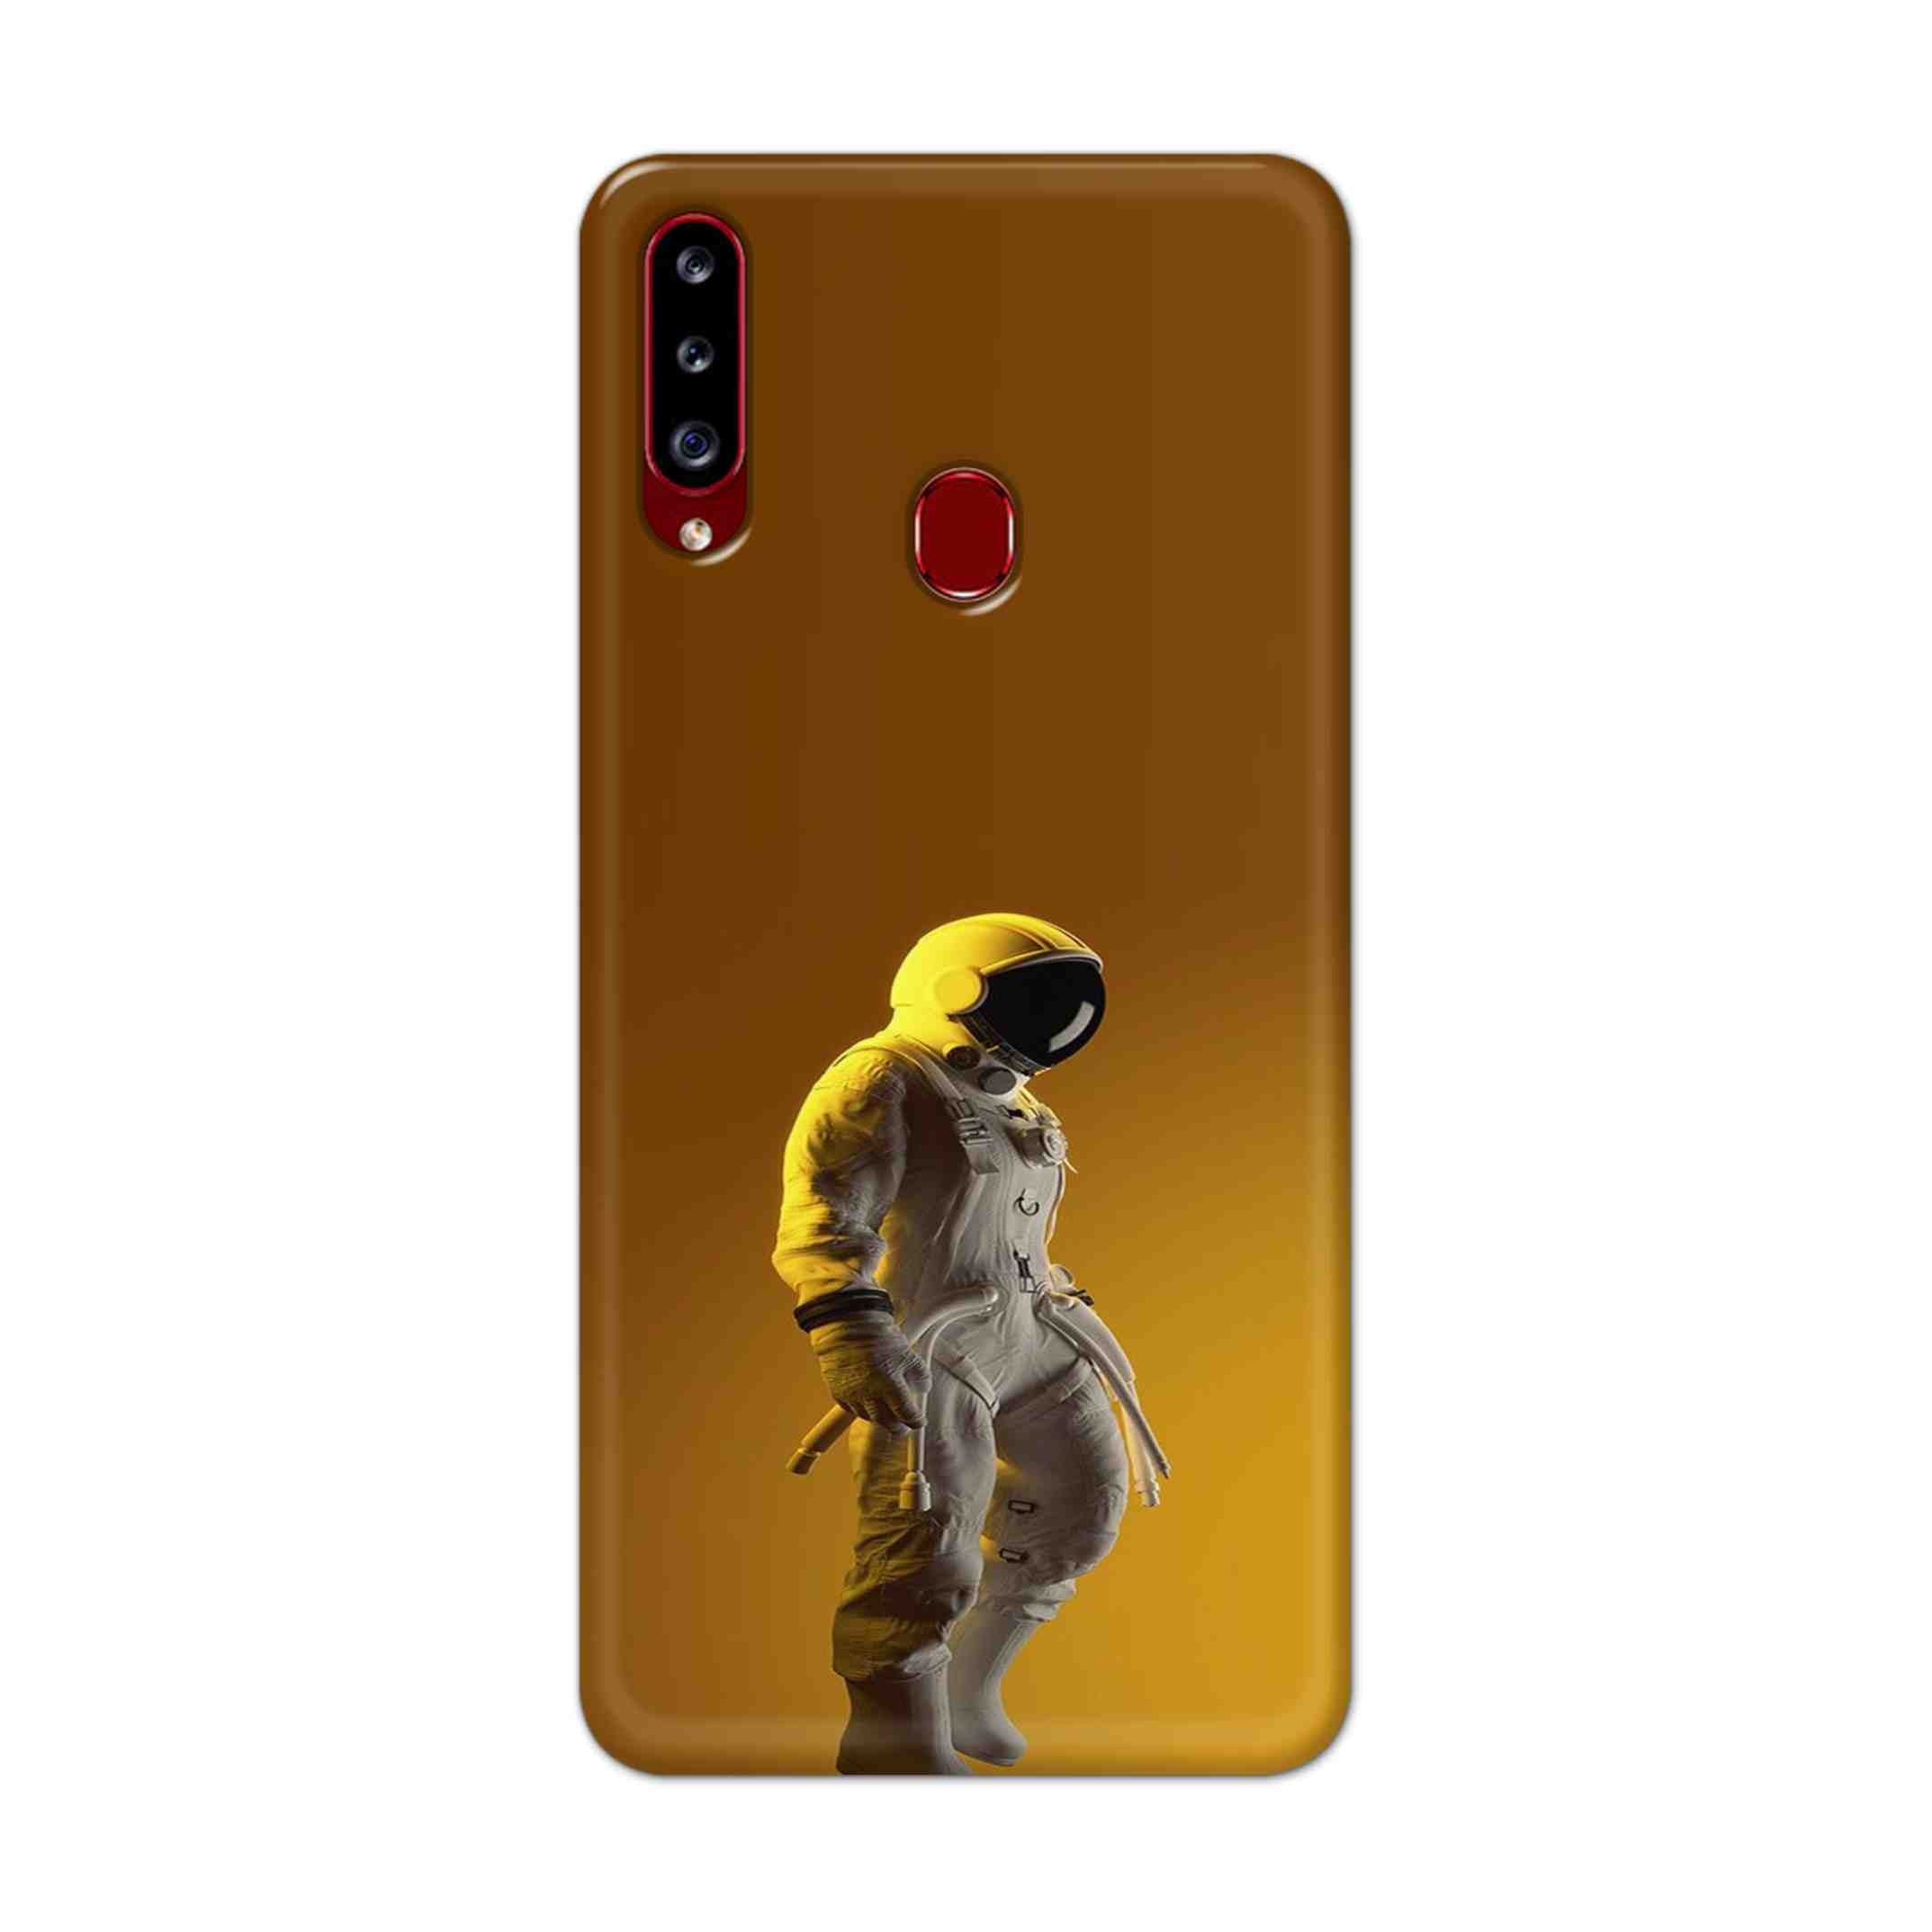 Buy Yellow Astronaut Hard Back Mobile Phone Case Cover For Samsung A20s Online